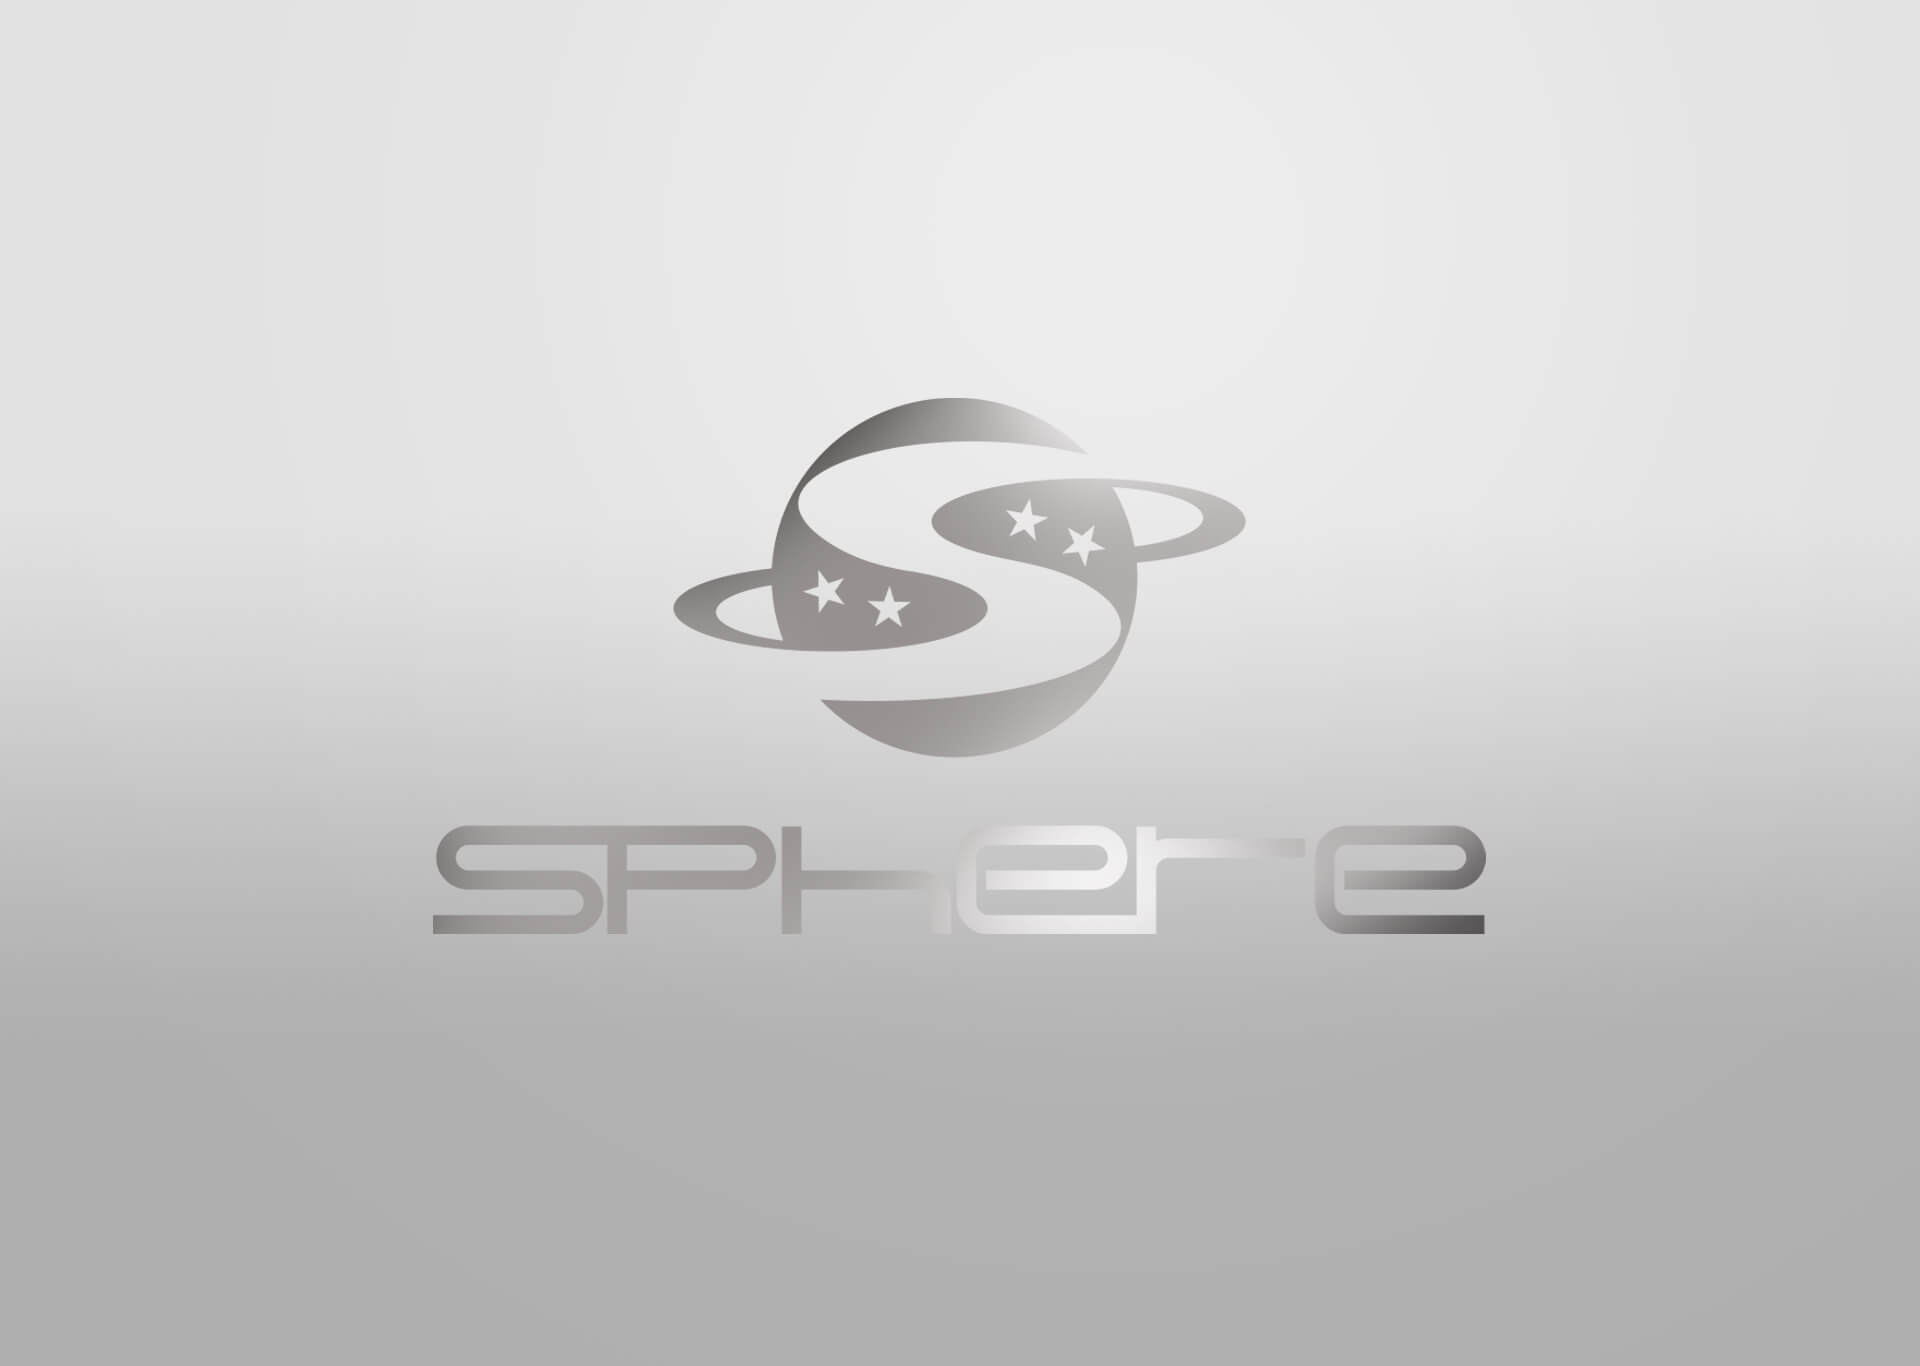 “We are SPHERE”